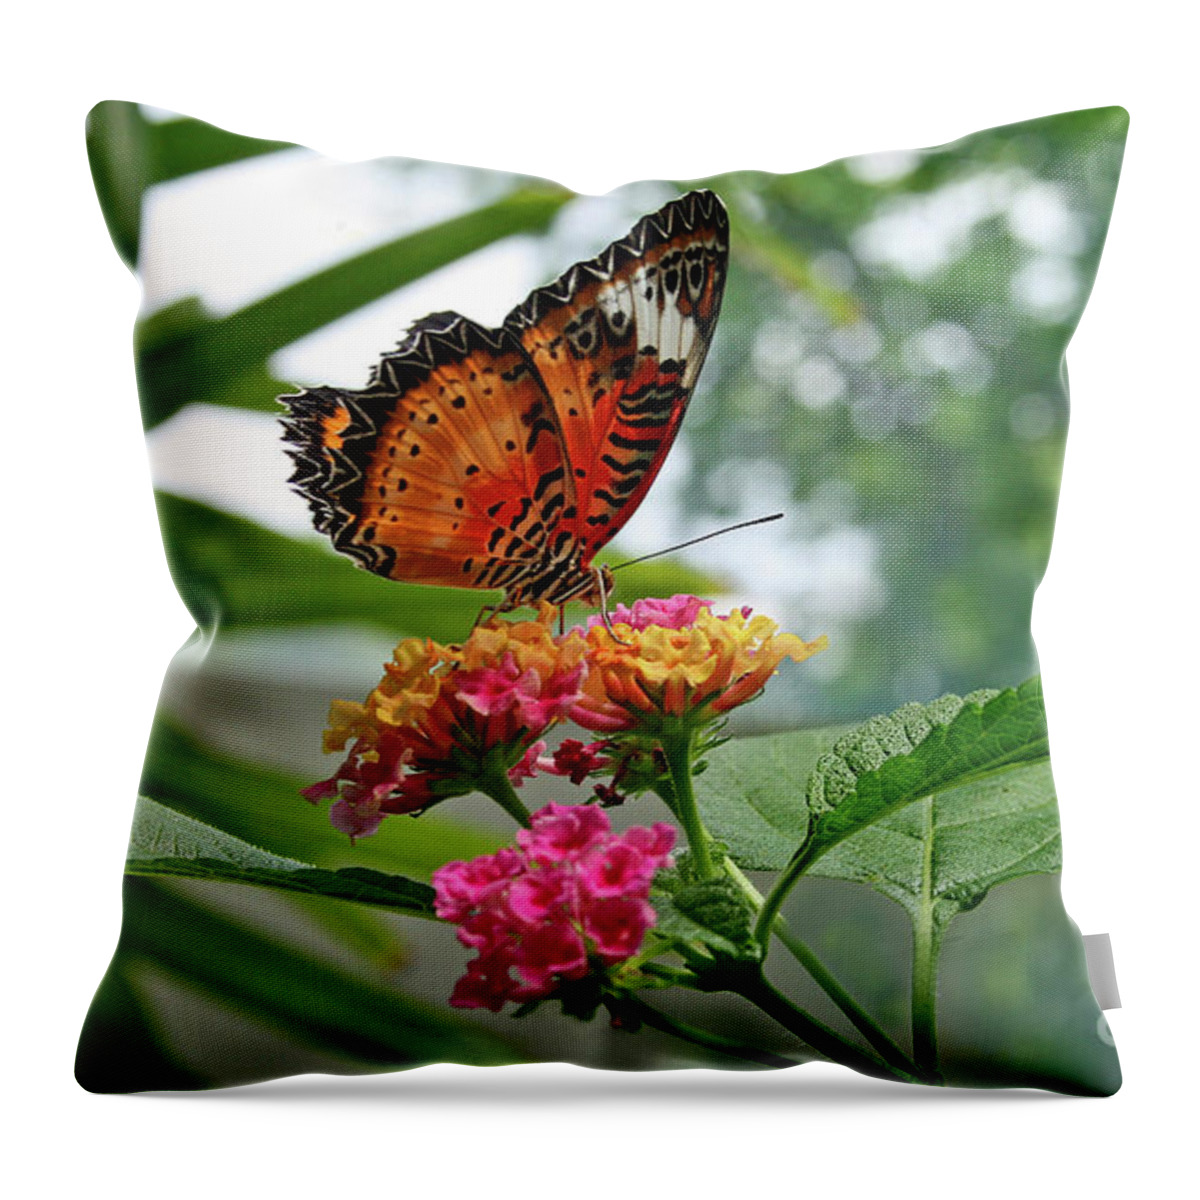 Butterfly Throw Pillow featuring the photograph Lacewing Butterfly by Karen Adams